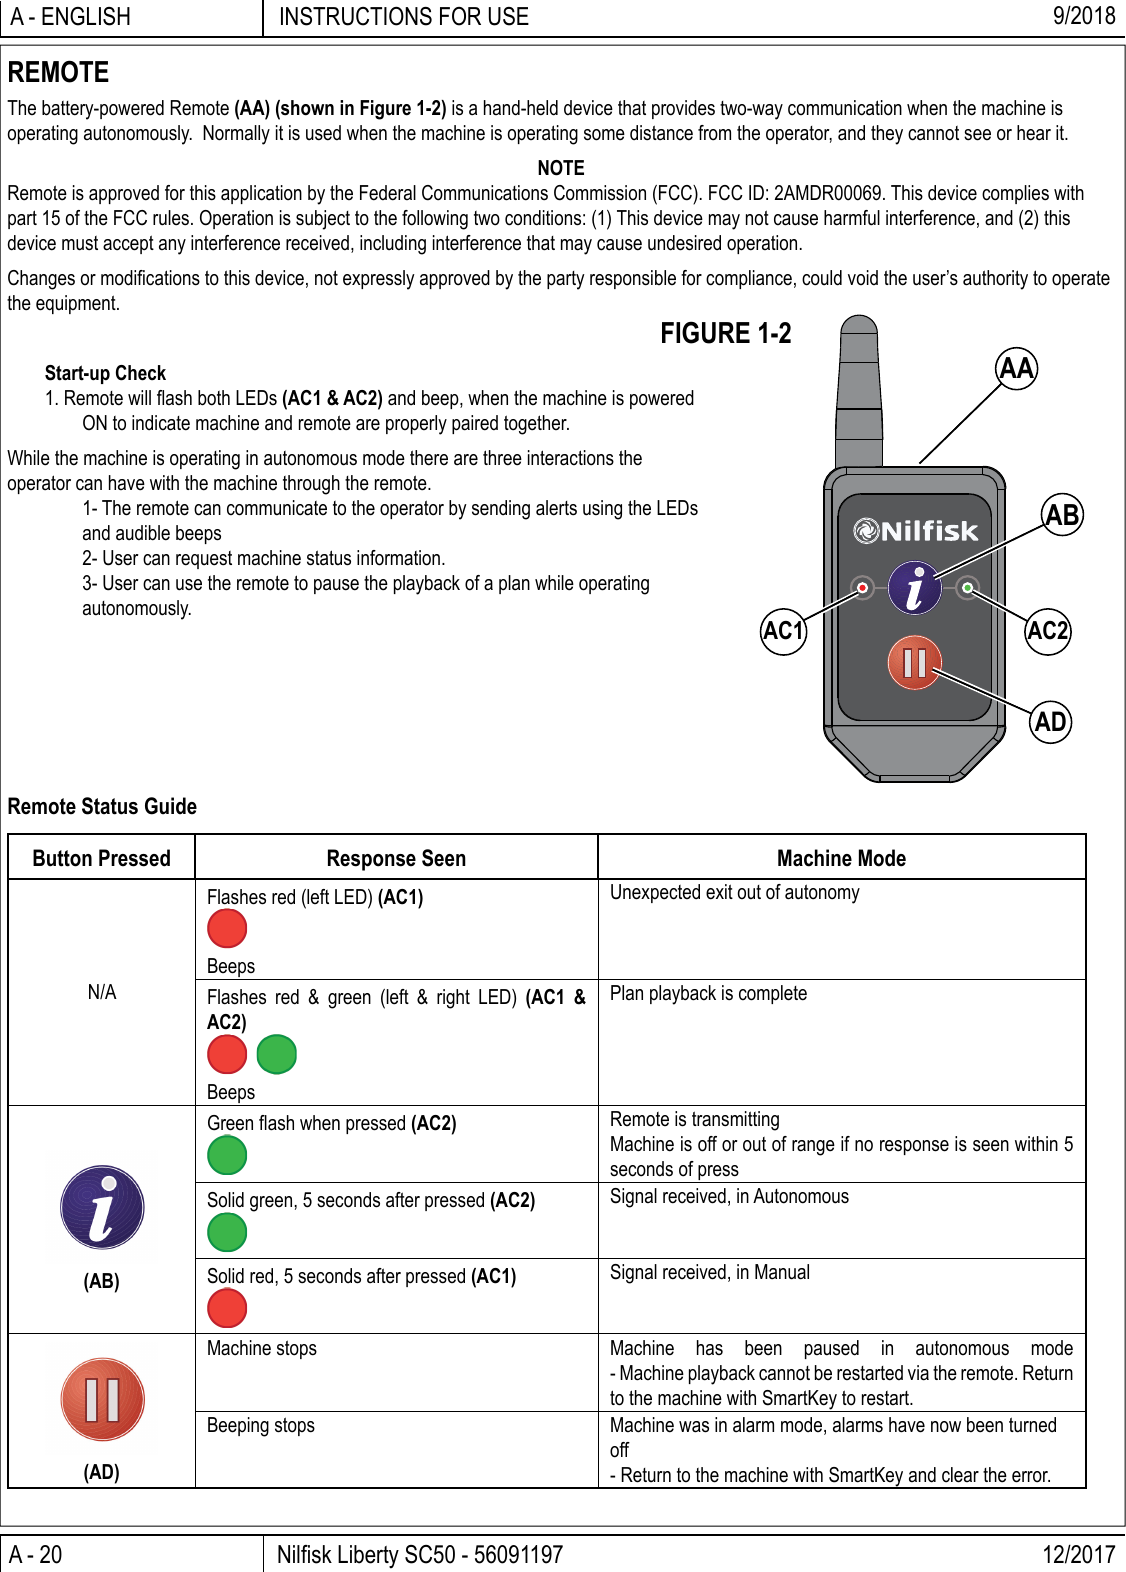 A - 20 Nilﬁ sk Liberty SC50 - 56091197 12/2017INSTRUCTIONS FOR USEA - ENGLISH 9/2018REMOTEThe battery-powered Remote (AA) (shown in Figure 1-2) is a hand-held device that provides two-way communication when the machine is operating autonomously.  Normally it is used when the machine is operating some distance from the operator, and they cannot see or hear it.NOTERemote is approved for this application by the Federal Communications Commission (FCC). FCC ID: 2AMDR00069. This device complies with part 15 of the FCC rules. Operation is subject to the following two conditions: (1) This device may not cause harmful interference, and (2) this device must accept any interference received, including interference that may cause undesired operation.Changes or modiﬁ cations to this device, not expressly approved by the party responsible for compliance, could void the user’s authority to operate the equipment.ADABAC2AC1AAStart-up Check1. Remote will ﬂ ash both LEDs (AC1 &amp; AC2) and beep, when the machine is poweredON to indicate machine and remote are properly paired together.While the machine is operating in autonomous mode there are three interactions the operator can have with the machine through the remote.  1- The remote can communicate to the operator by sending alerts using the LEDsand audible beeps2- User can request machine status information.3- User can use the remote to pause the playback of a plan while operatingautonomously.Remote Status GuideButton Pressed Response Seen Machine ModeN/AFlashes red (left LED) (AC1)BeepsUnexpected exit out of autonomyFlashes red &amp; green (left &amp; right LED) (AC1 &amp; AC2))BeepsPlan playback is complete(AB)Green ﬂ ash when pressed (AC2) Remote is transmittingMachine is off or out of range if no response is seen within 5 seconds of pressSolid green, 5 seconds after pressed (AC2) Signal received, in AutonomousSolid red, 5 seconds after pressed (AC1) Signal received, in Manual(AD)Machine stops Machine has been paused in autonomous mode- Machine playback cannot be restarted via the remote. Return to the machine with SmartKey to restart.Beeping stops Machine was in alarm mode, alarms have now been turned off- Return to the machine with SmartKey and clear the error.FIGURE 1-2